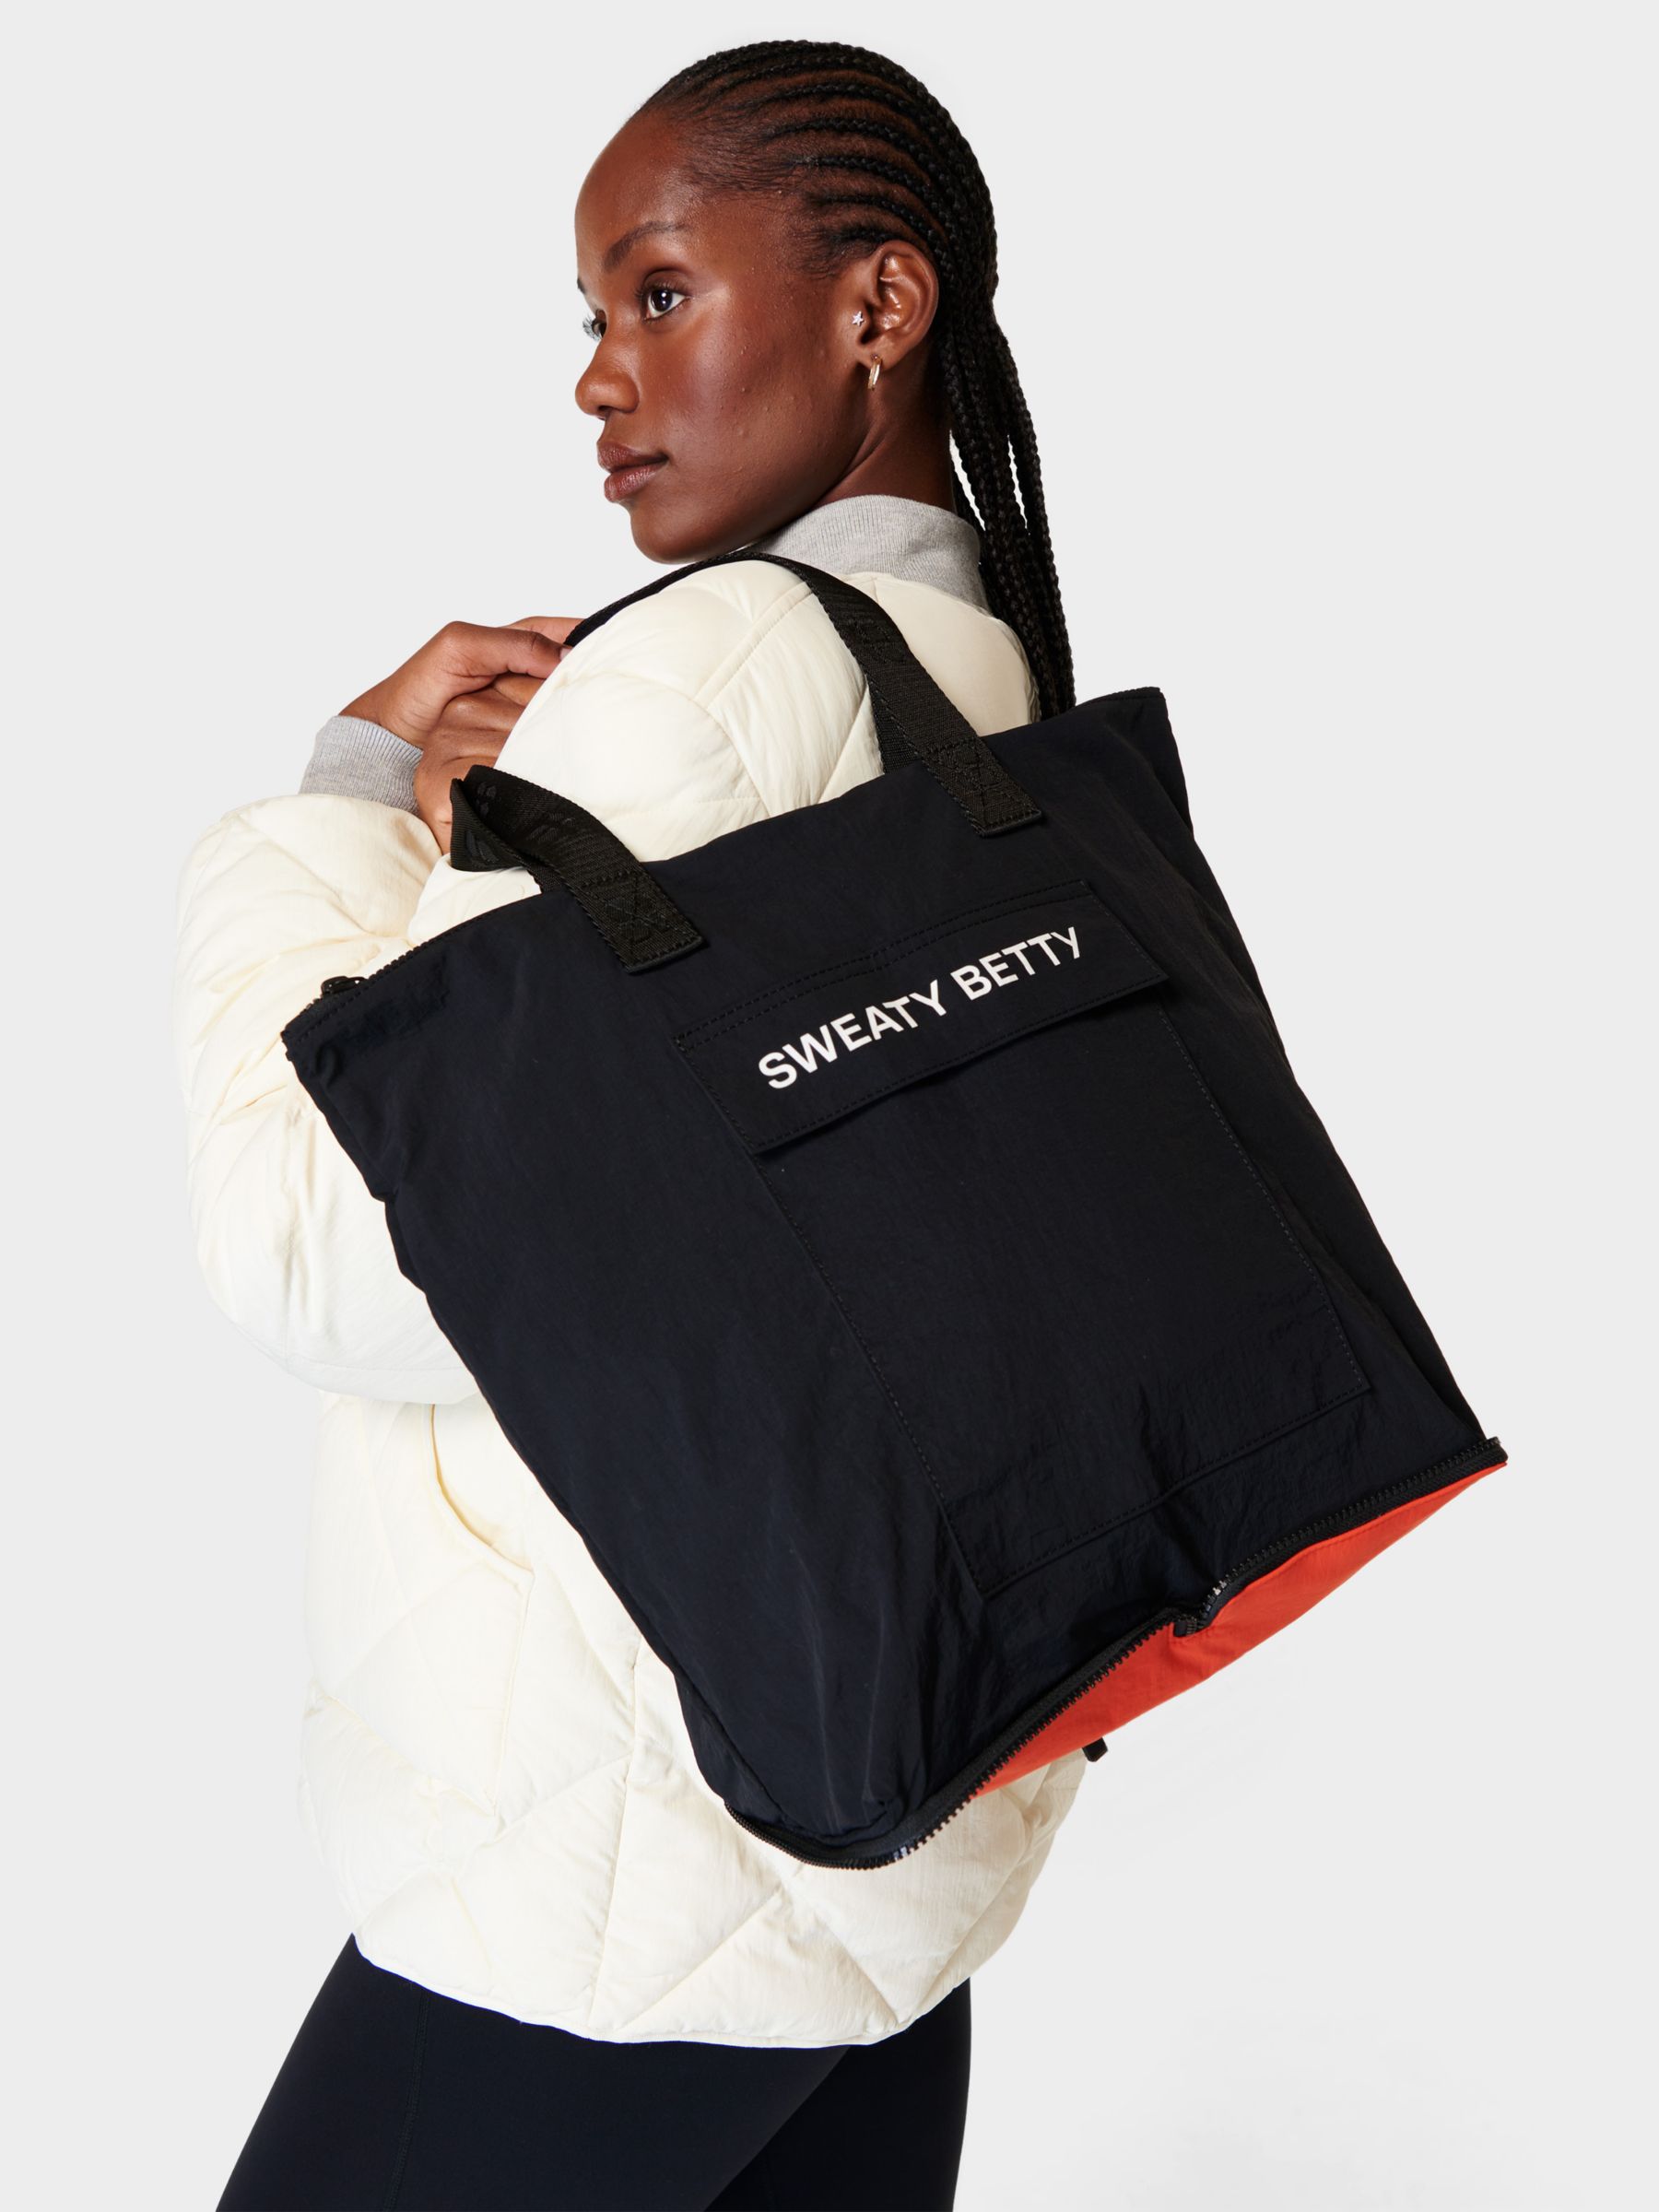 Sweaty Betty Essentials Packable Tote Bag, Black, One Size